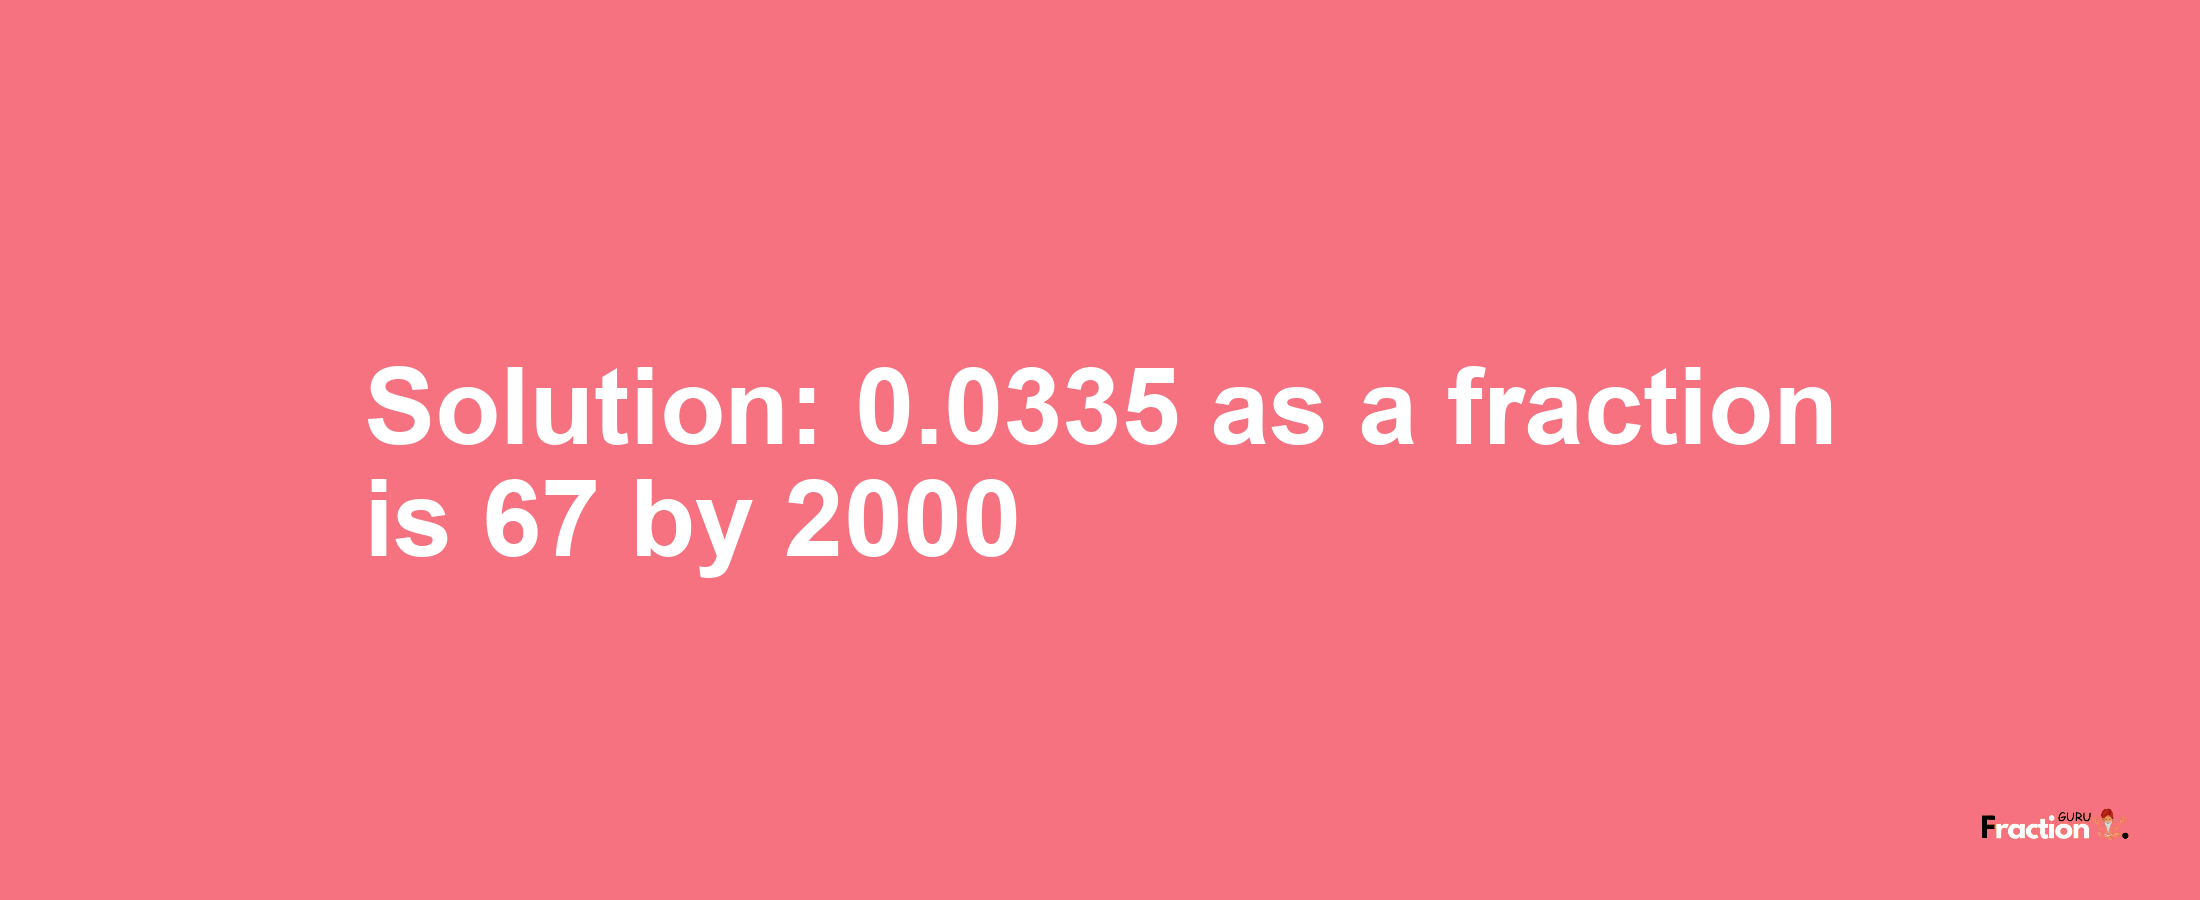 Solution:0.0335 as a fraction is 67/2000